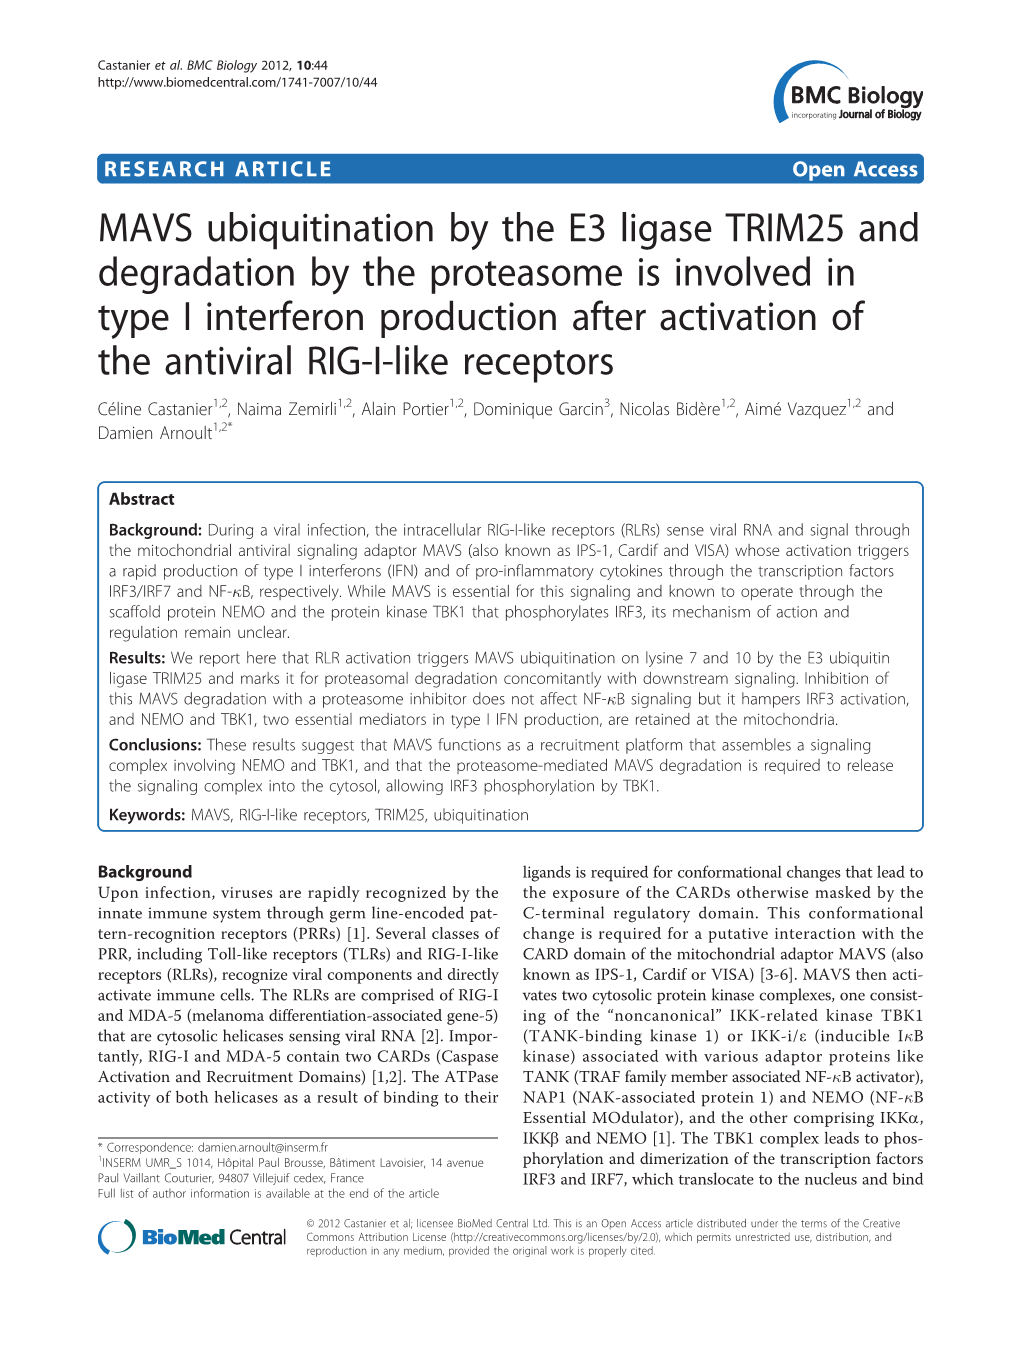 MAVS Ubiquitination by the E3 Ligase TRIM25 and Degradation by The